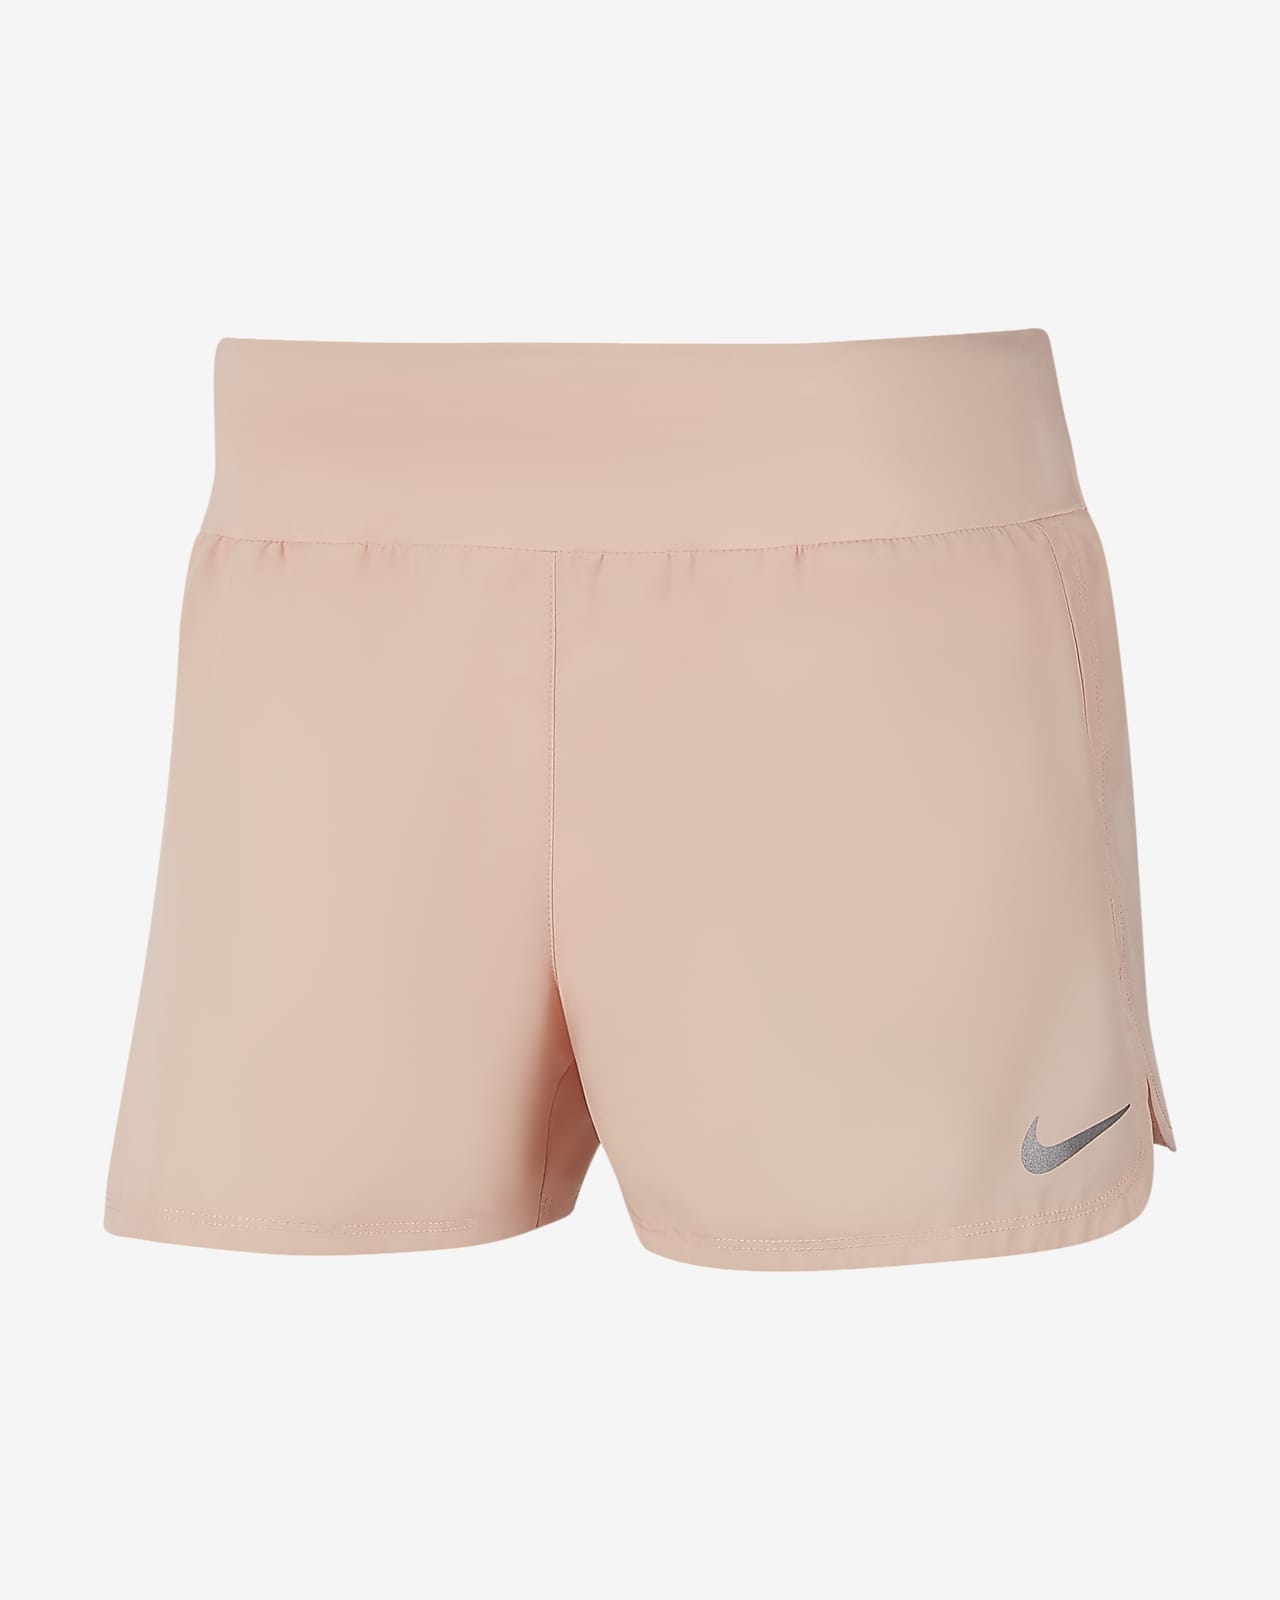 nike clothes on sale womens